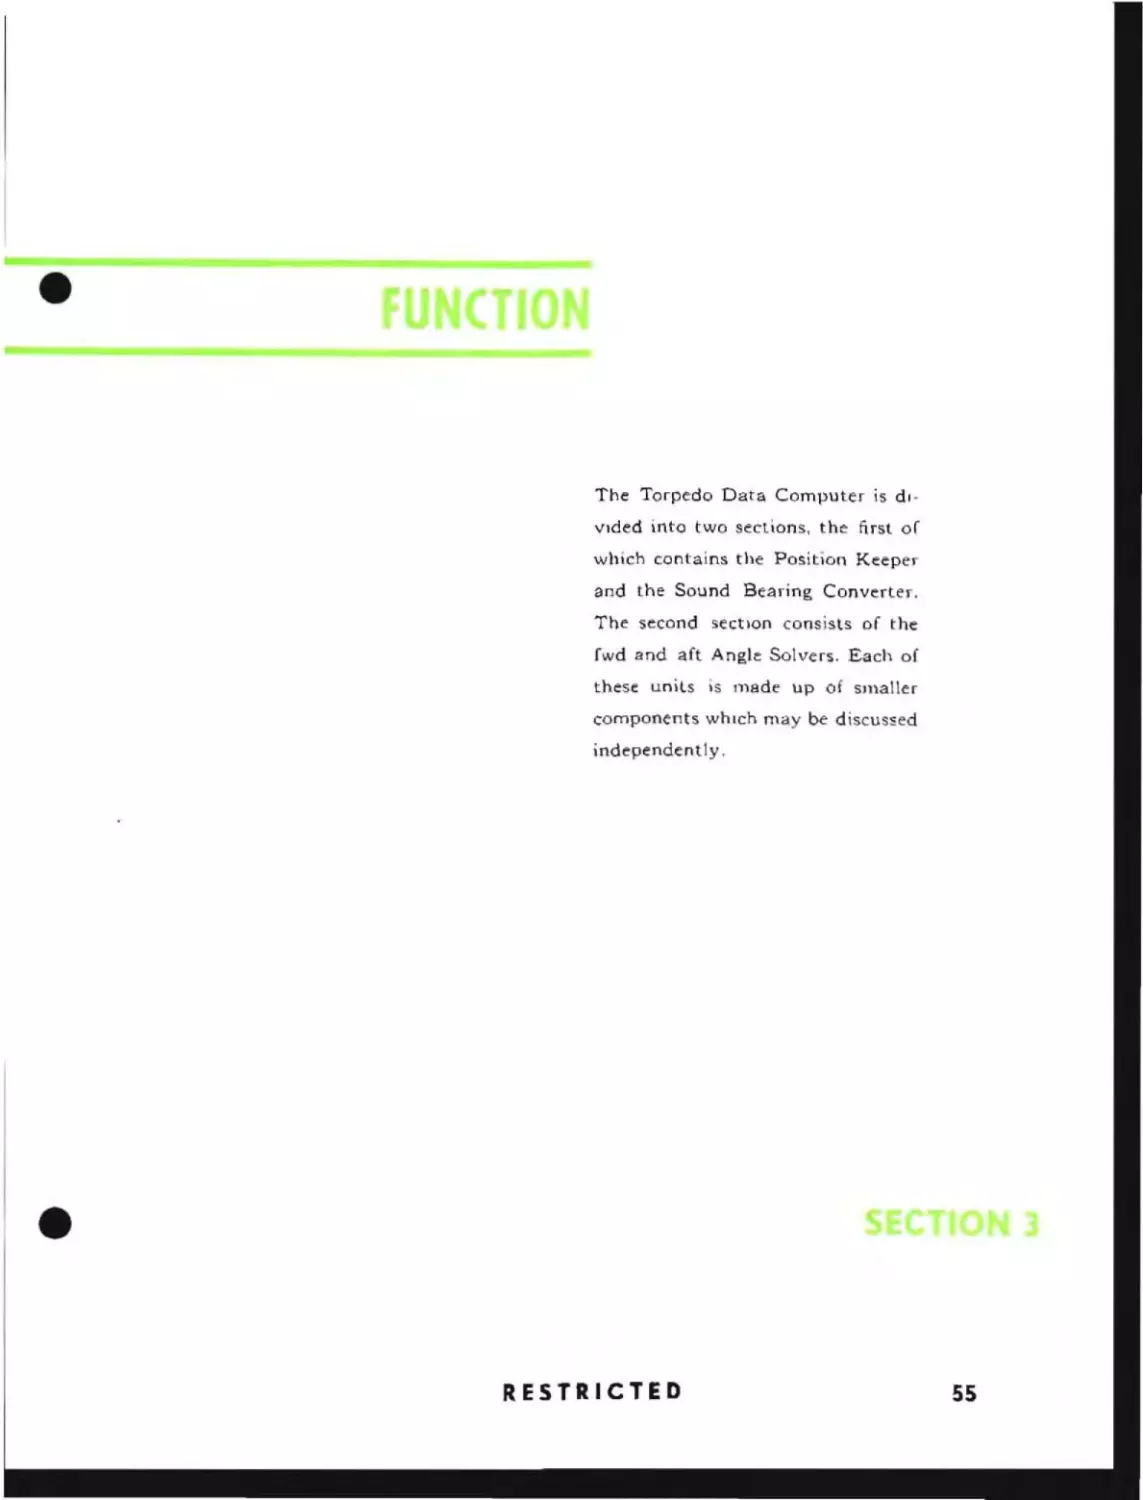 Page 55, Function